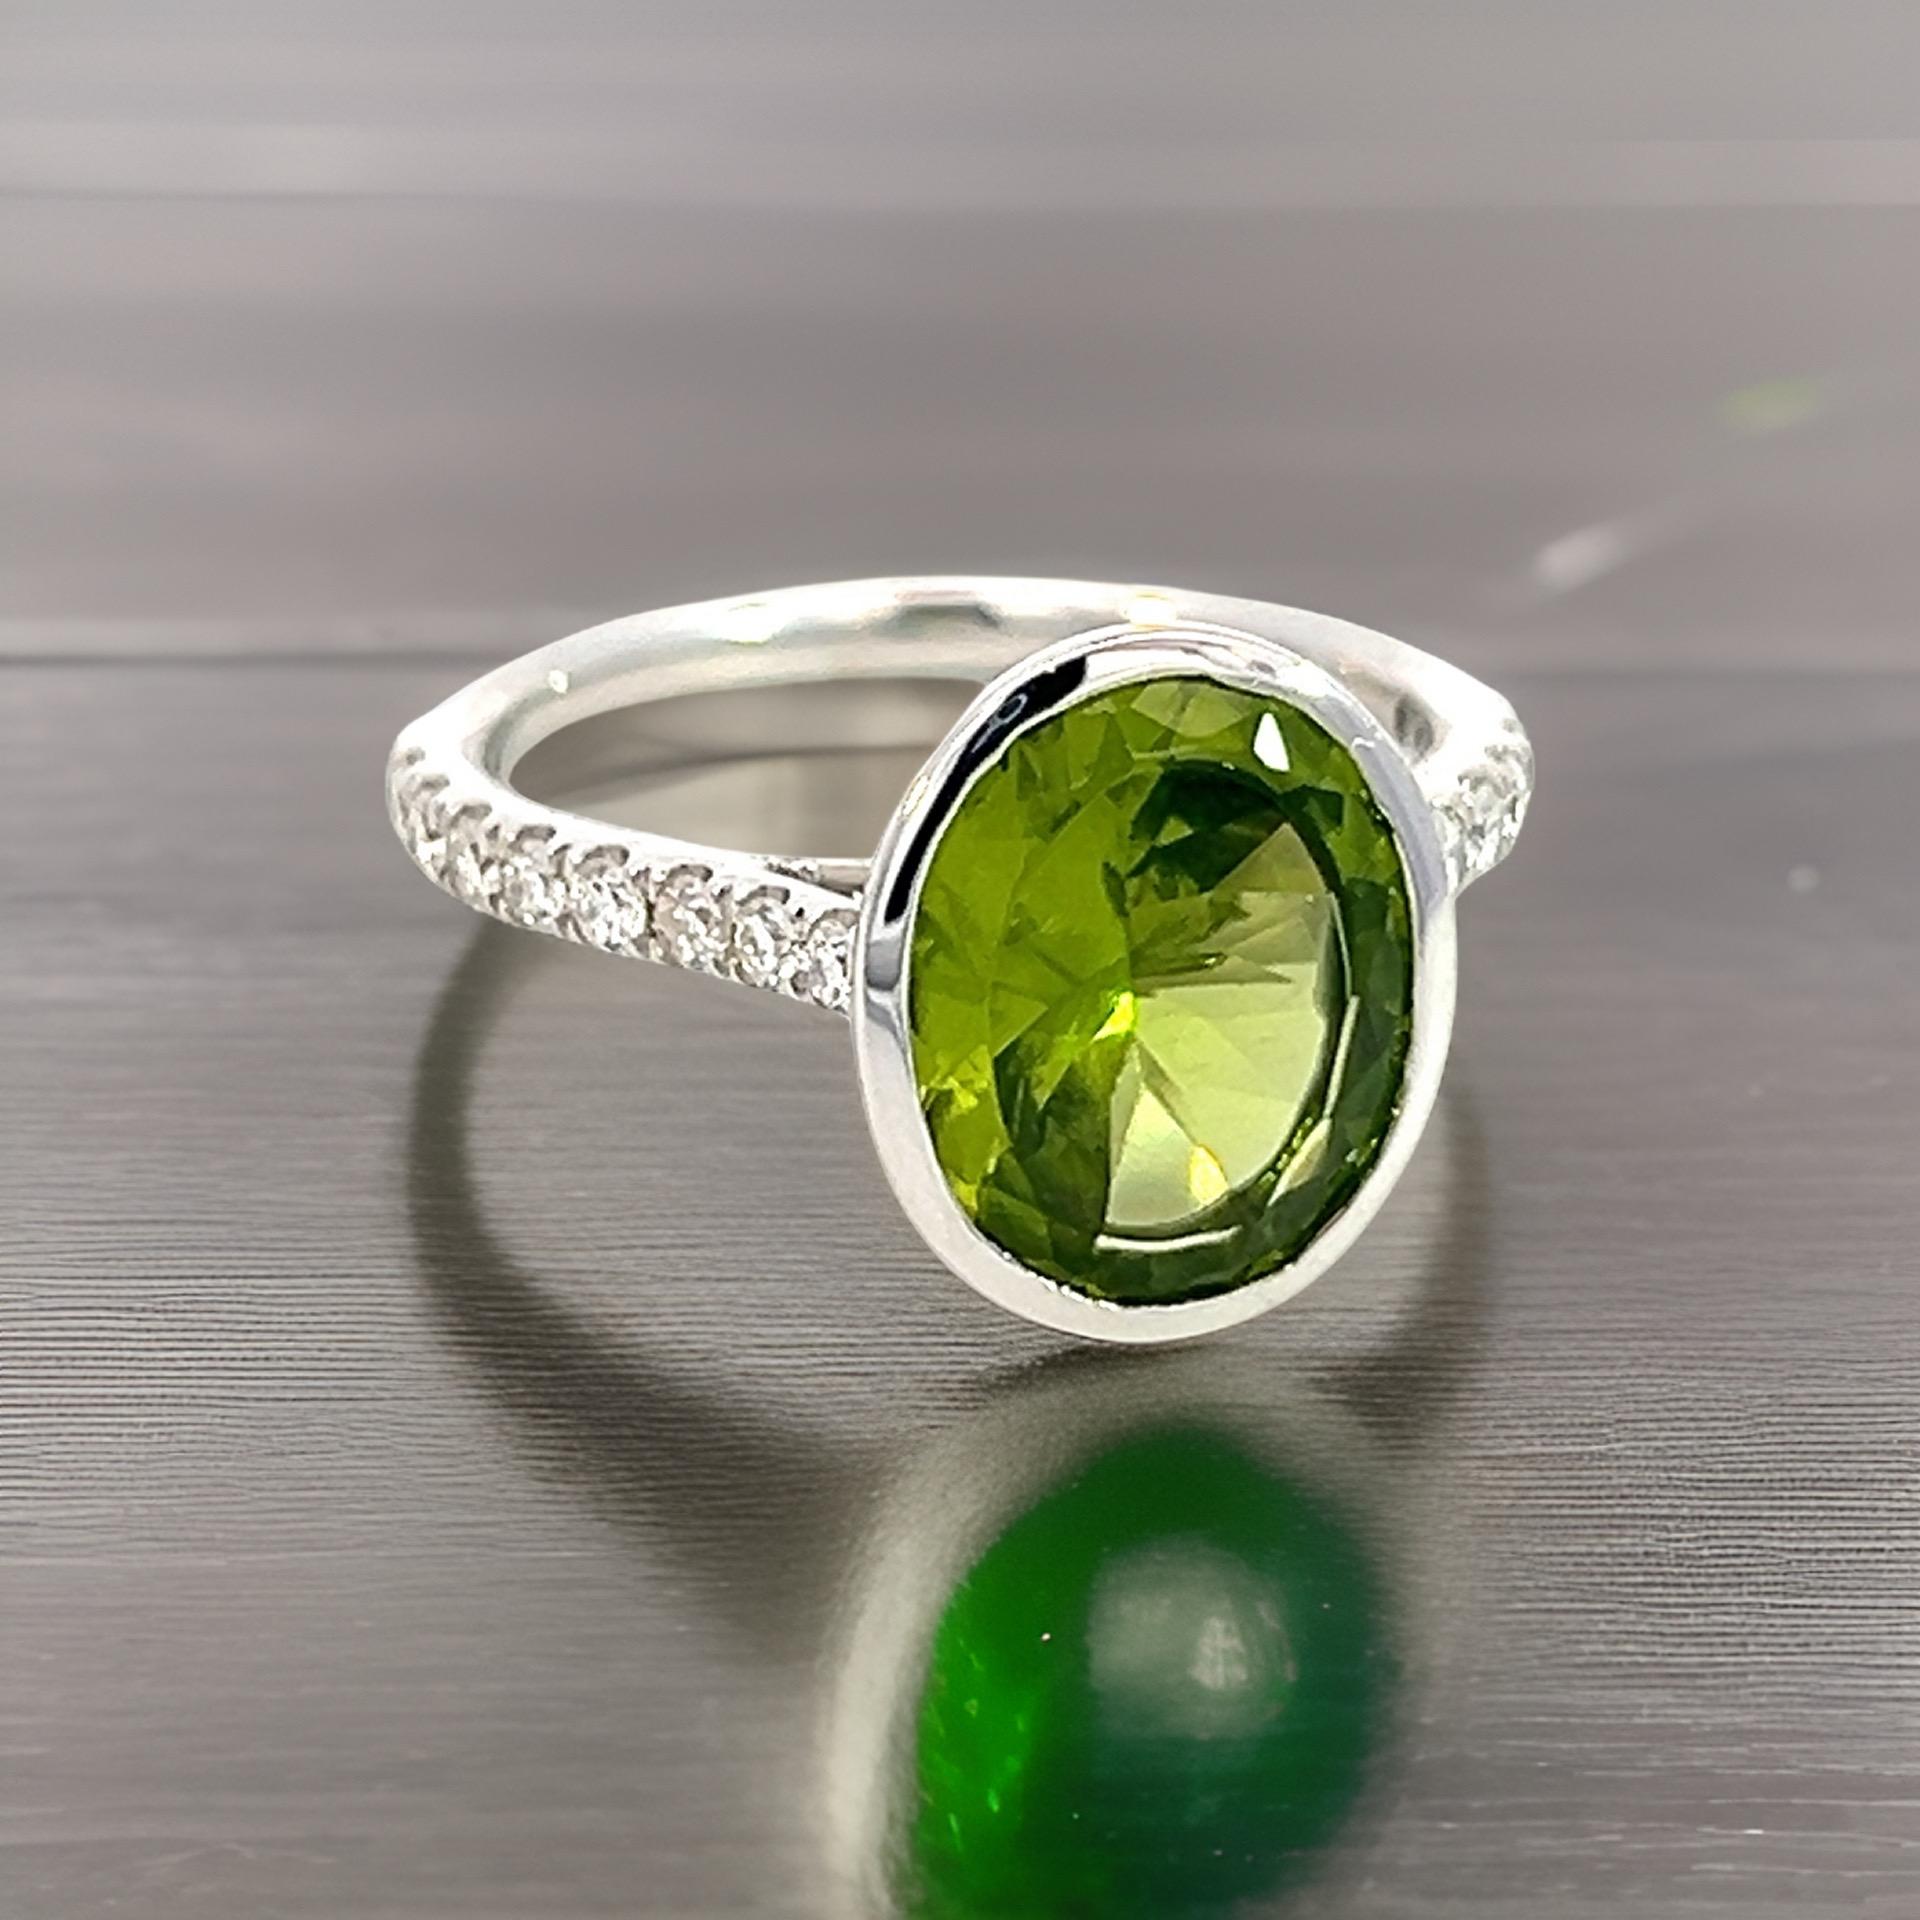 Oval Cut Natural Peridot Diamond Ring 6.5 14k W Gold 3.49 TCW Certified For Sale